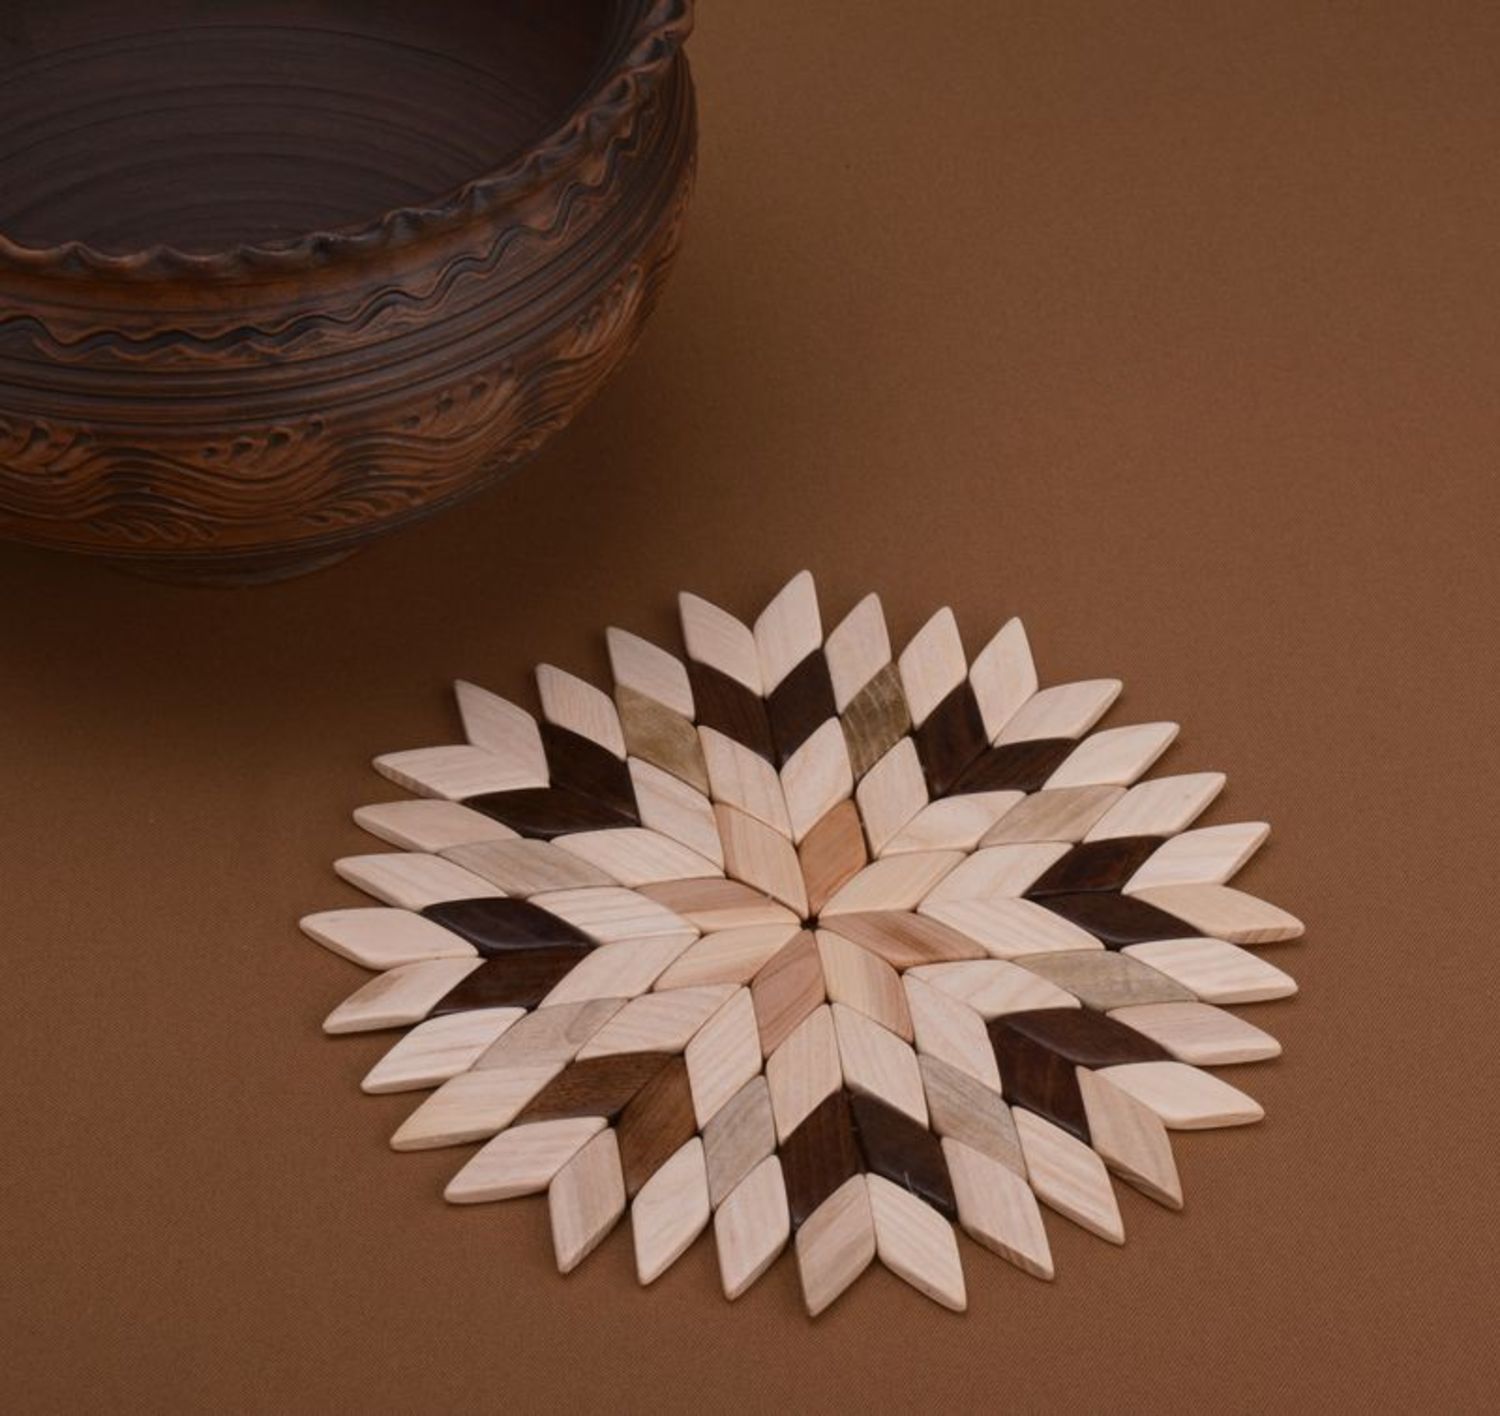 Coaster for hot dishes in the shape of a snowflake photo 4